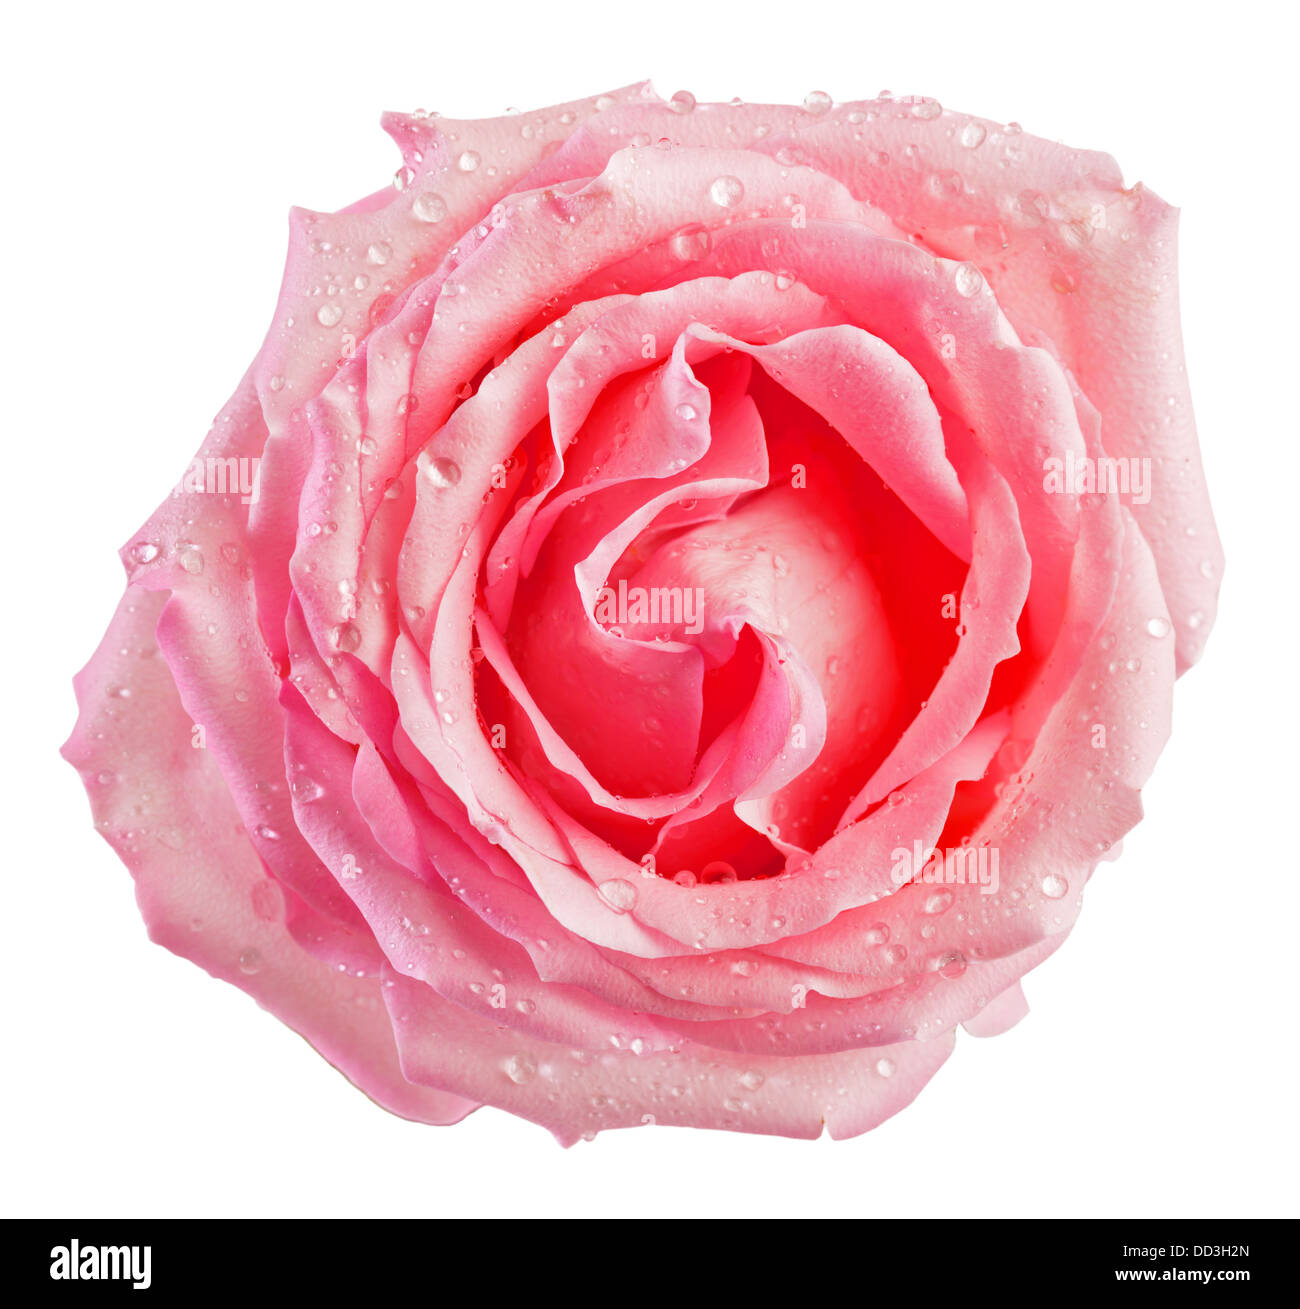 Bouton de rose rose top view isolated over white Banque D'Images